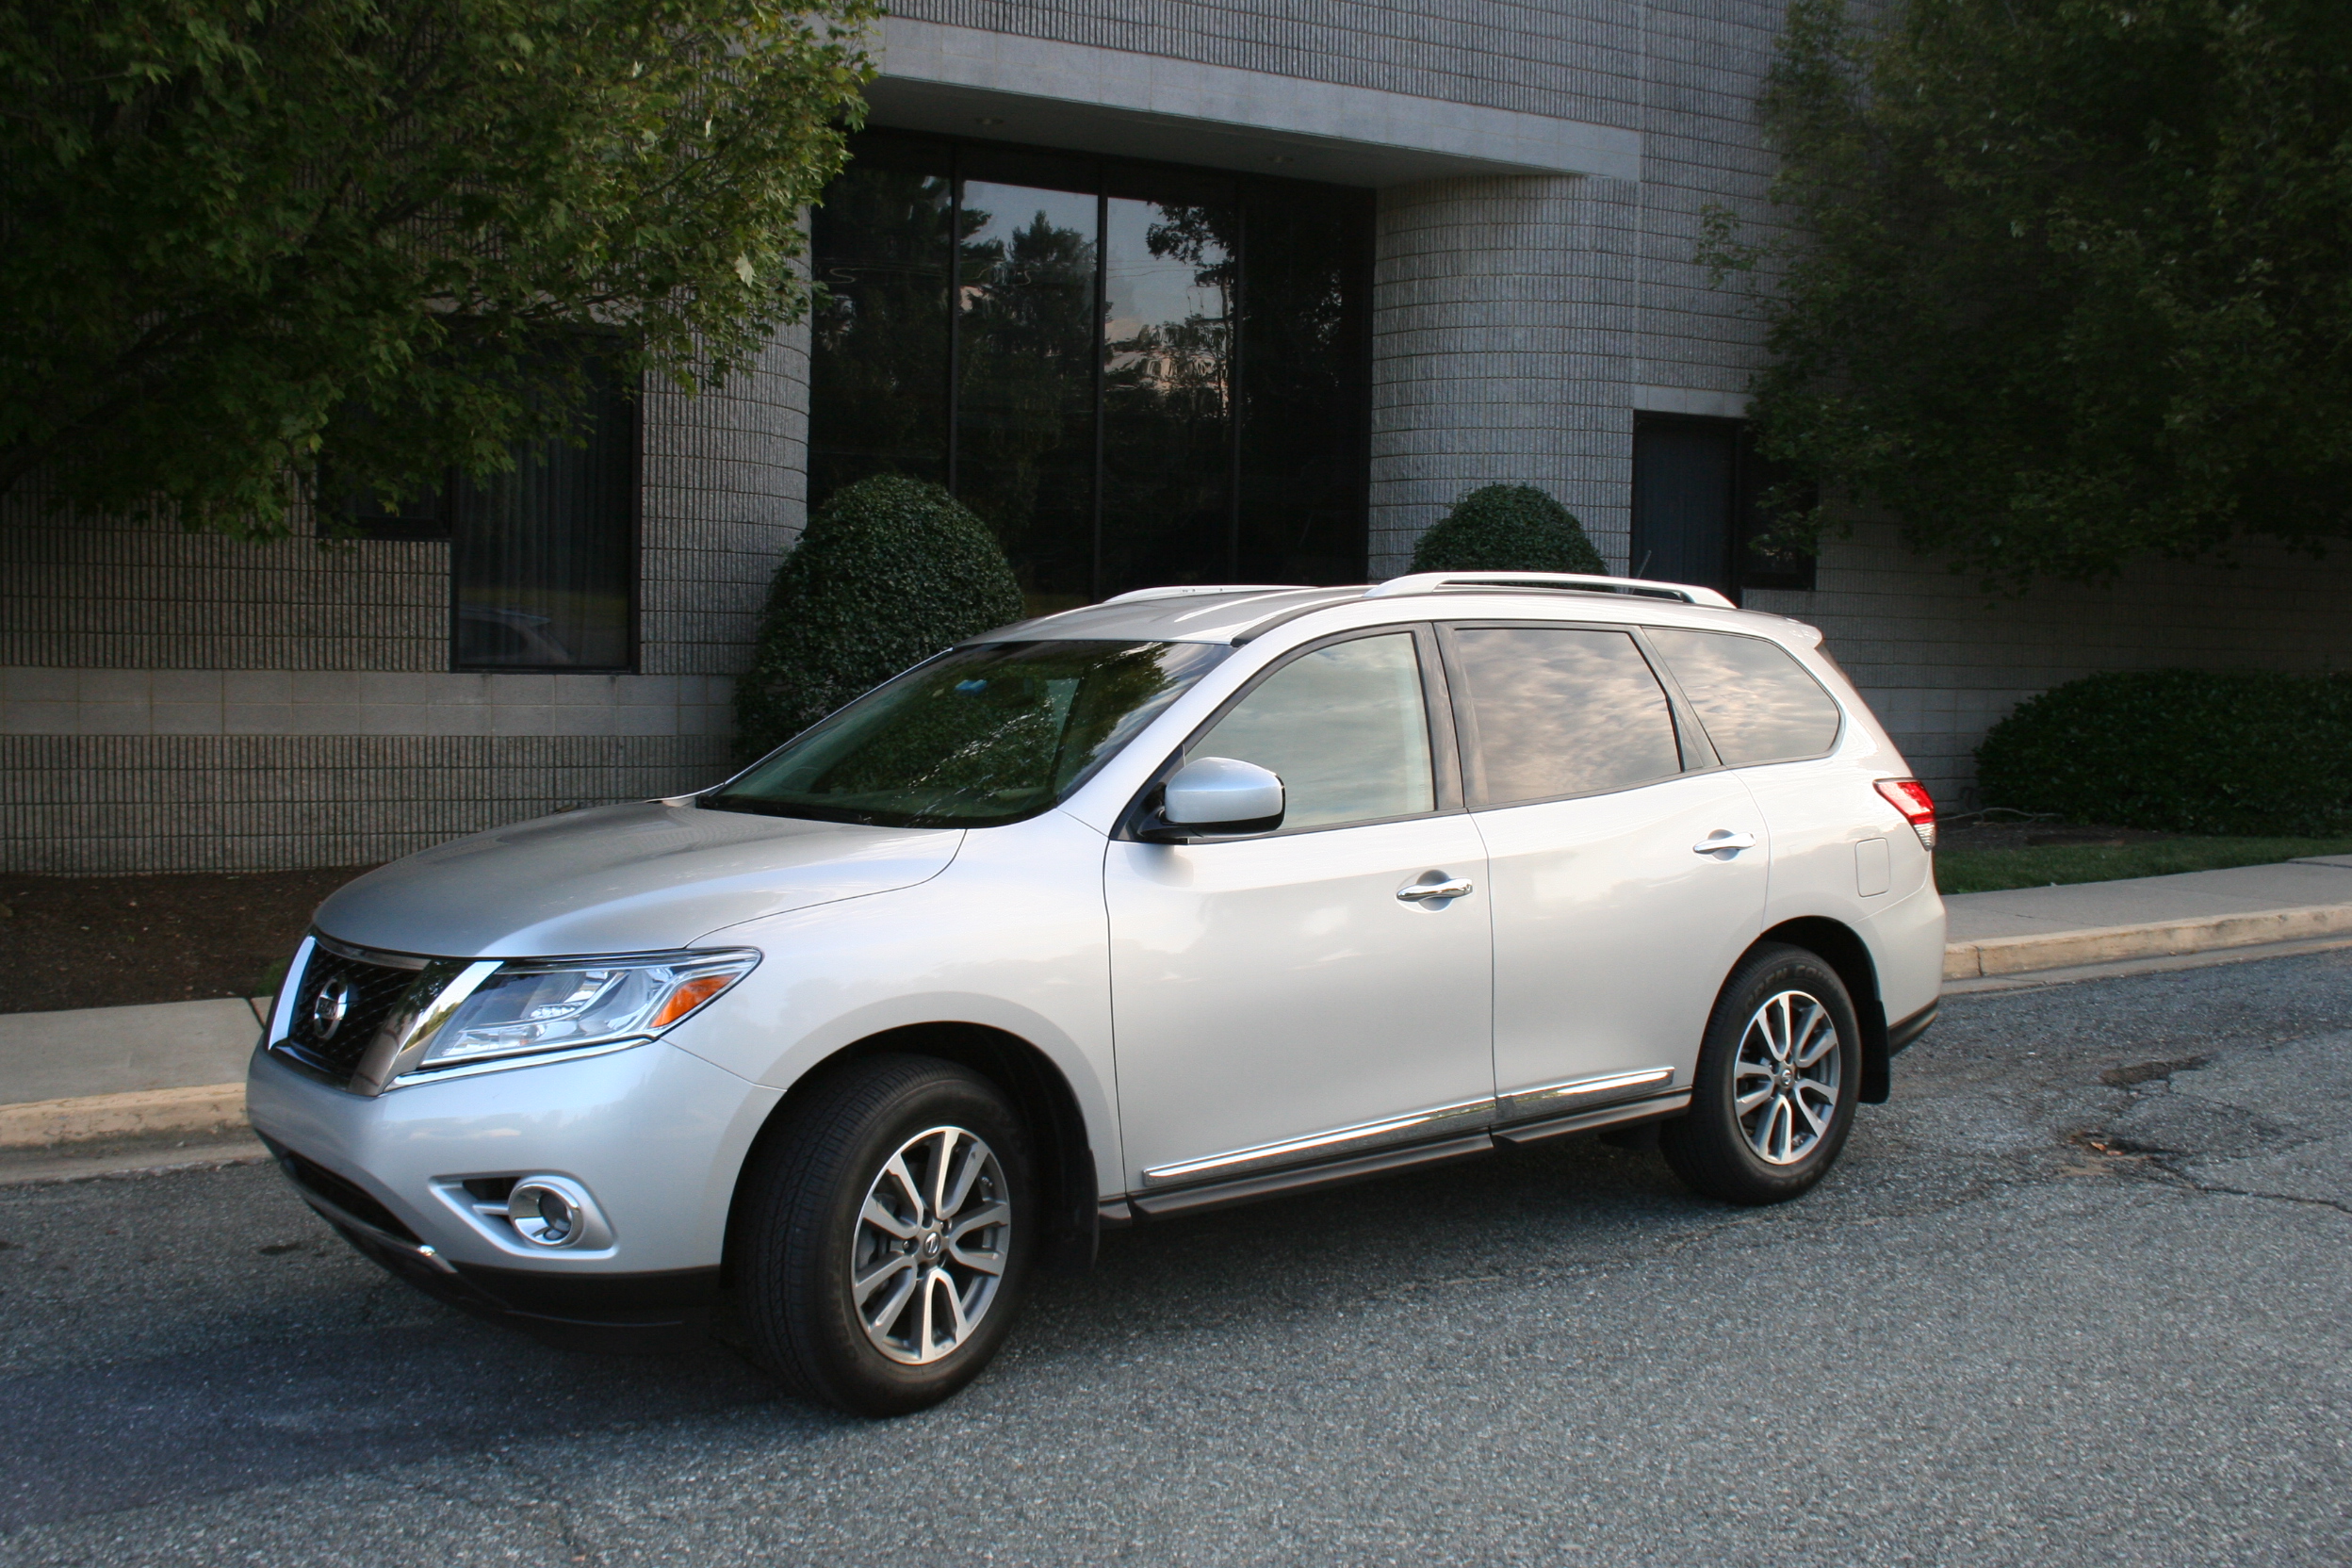 Car Report: The Nissan Pathfinder is now a more family-oriented crossover